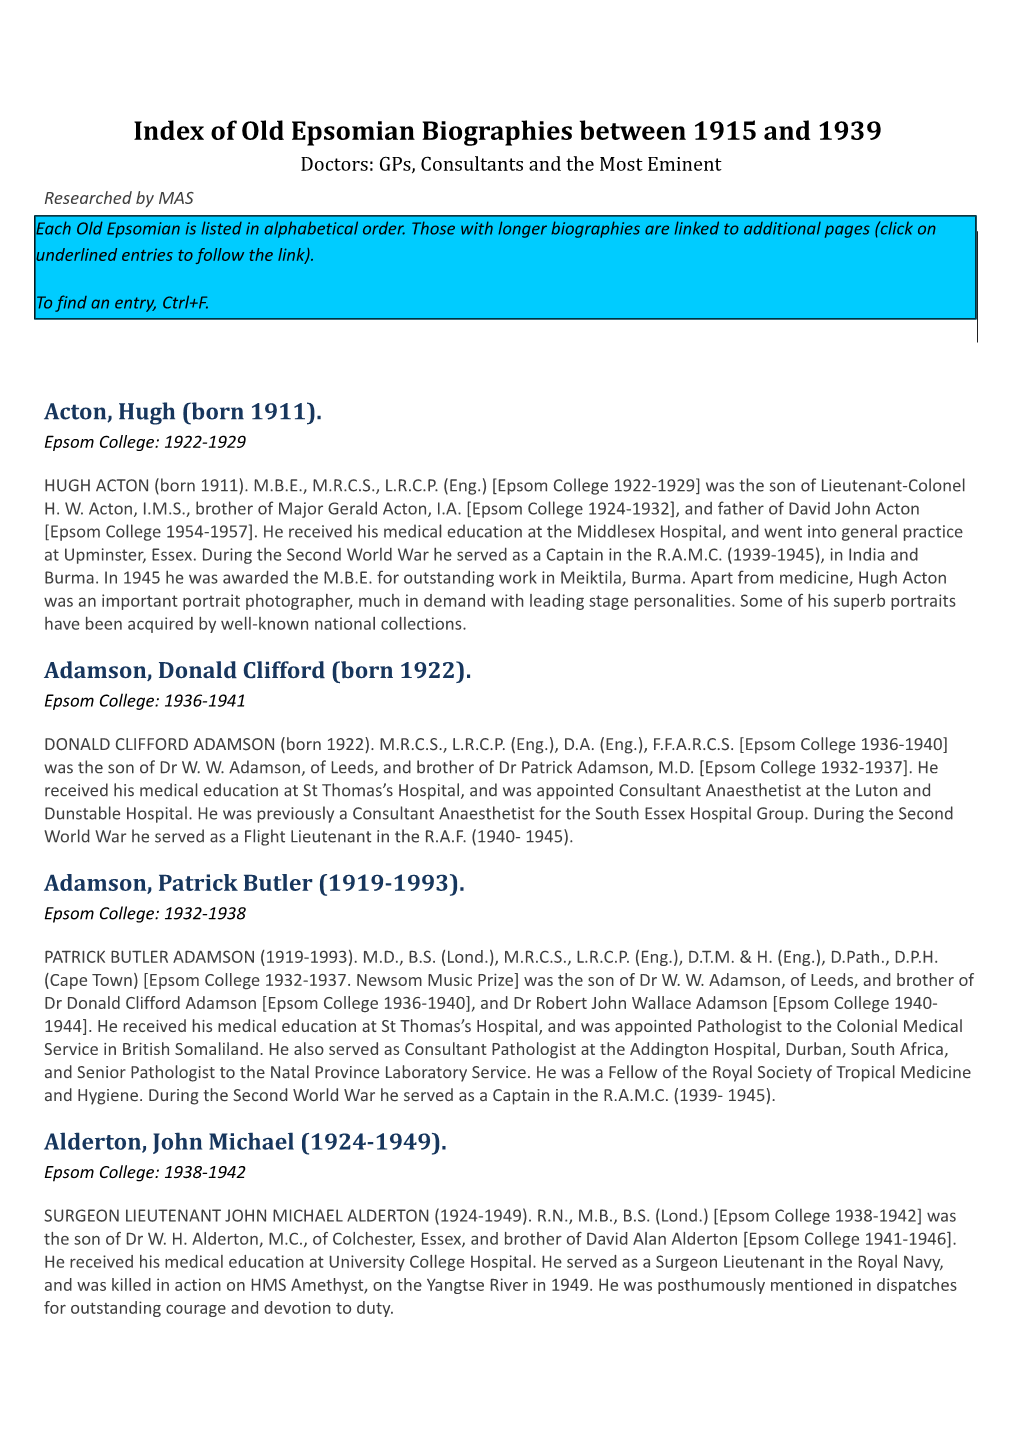 Of Old Epsomian Biographies Between 1915 and 1939 Doctors: Gps, Consultants and the Most Eminent Researched by MAS Each Old Epsomian Is Listed in Alphabetical Order